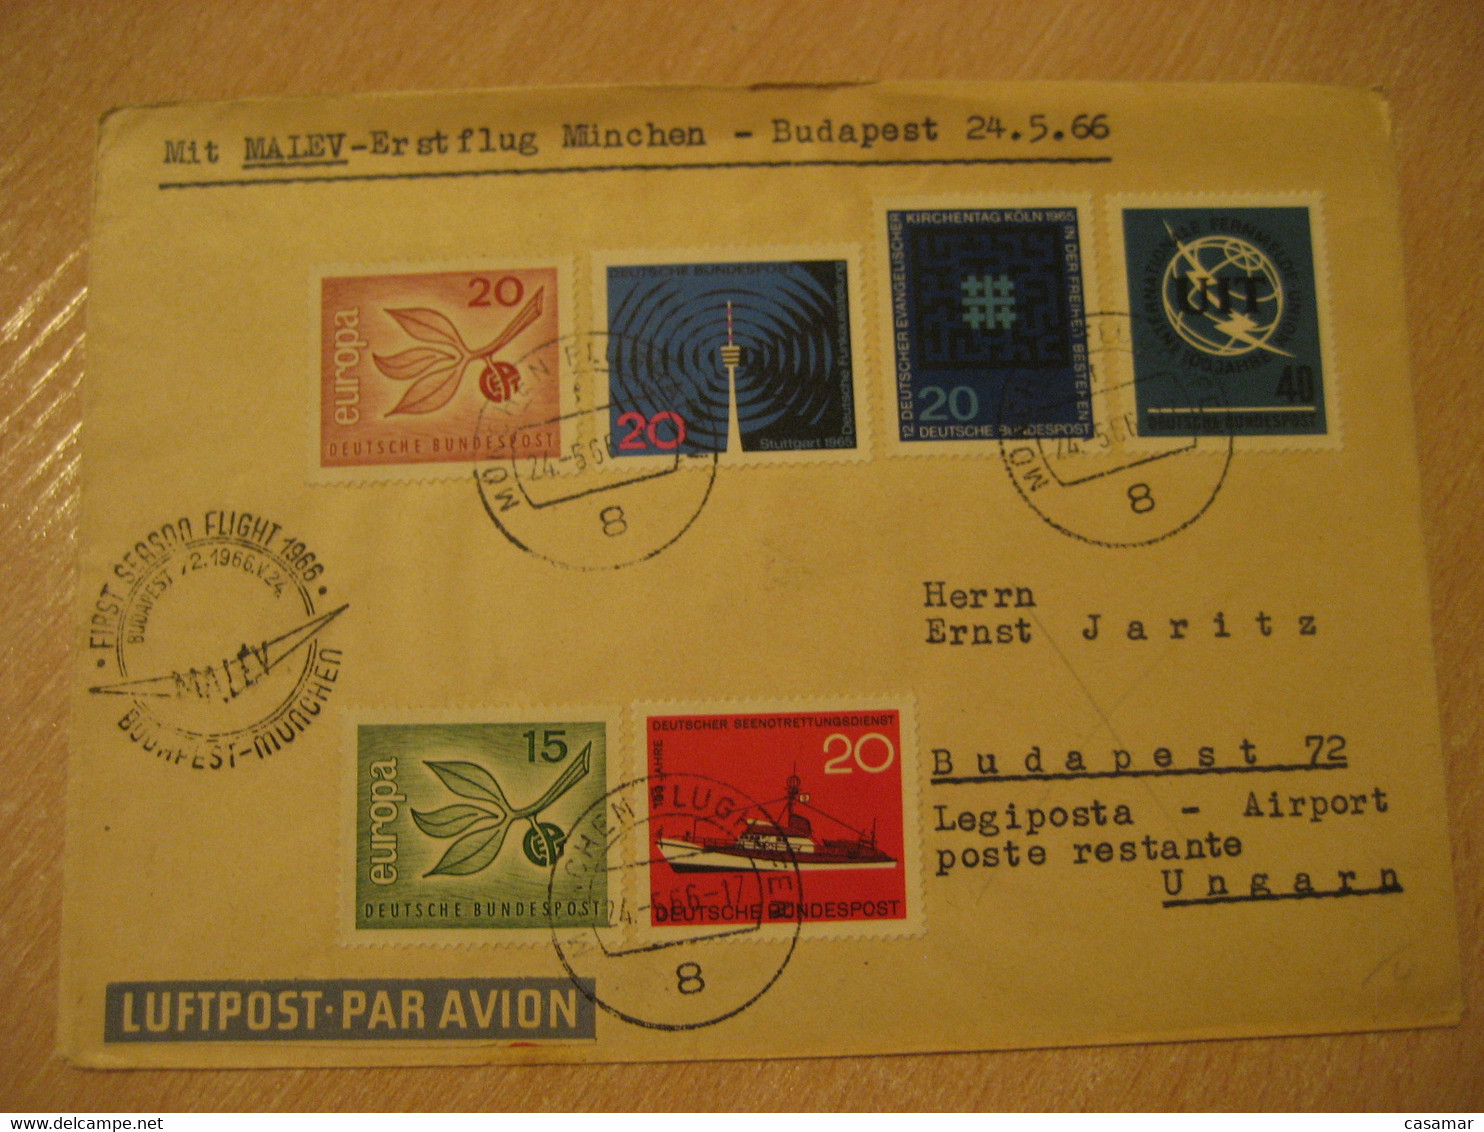 BUDAPEST Munich 1966 MALEV Airlines Airline First Season Flight Cancel Cover HUNGARY GERMANY - Storia Postale